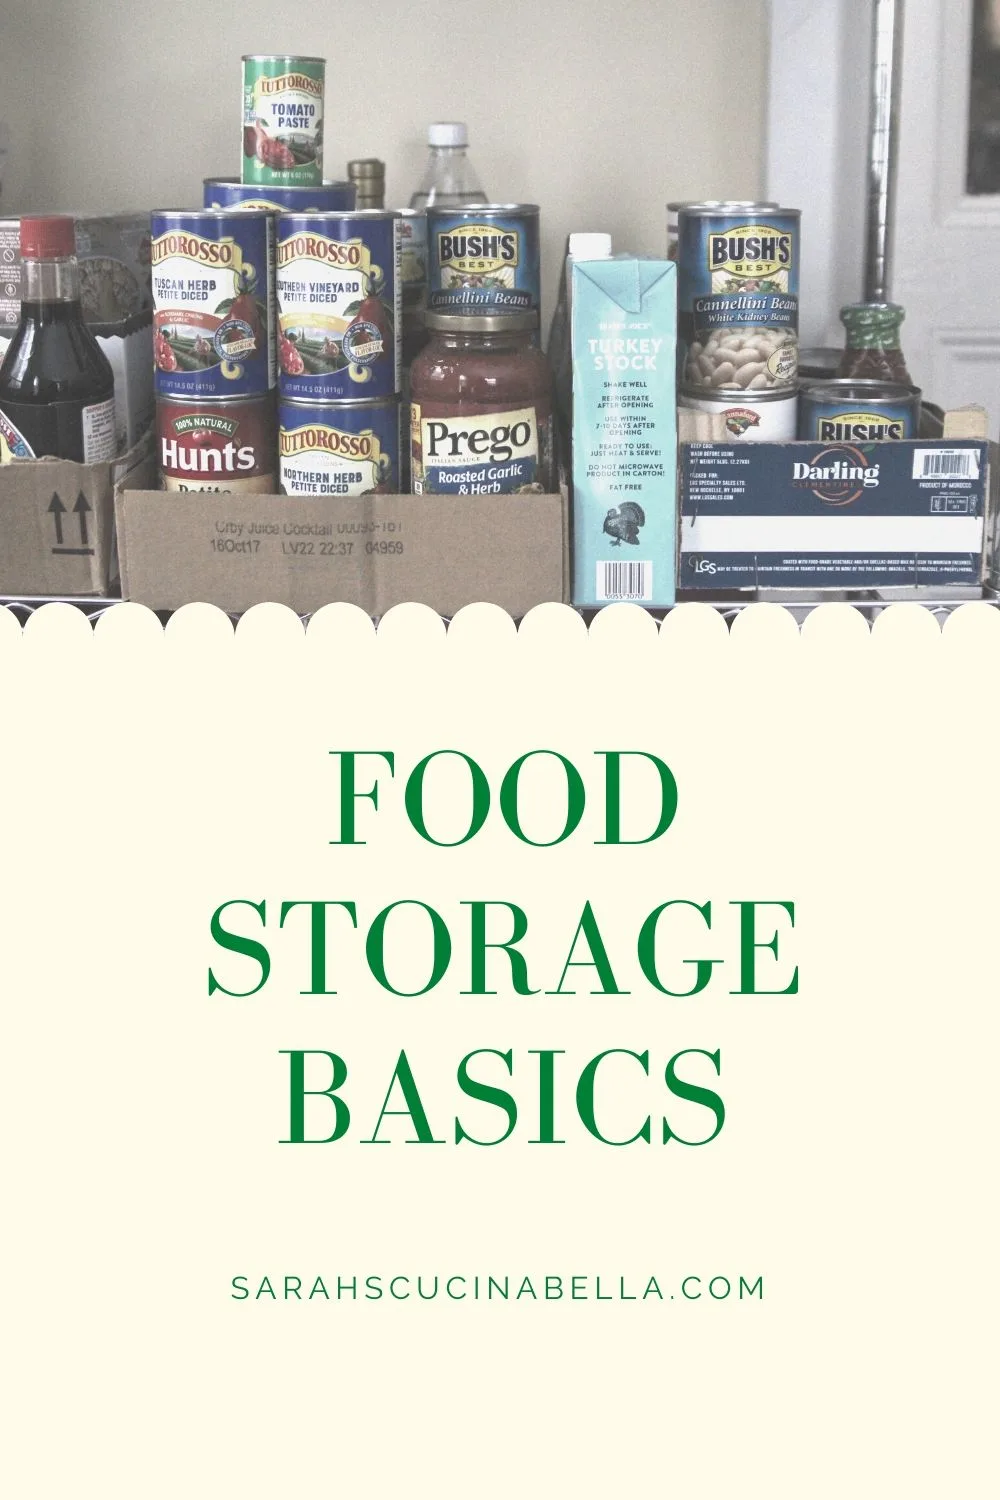 This image shows stored food — tomatoes, marinara broth, beans, etc — and the words "Food Storage Basics."